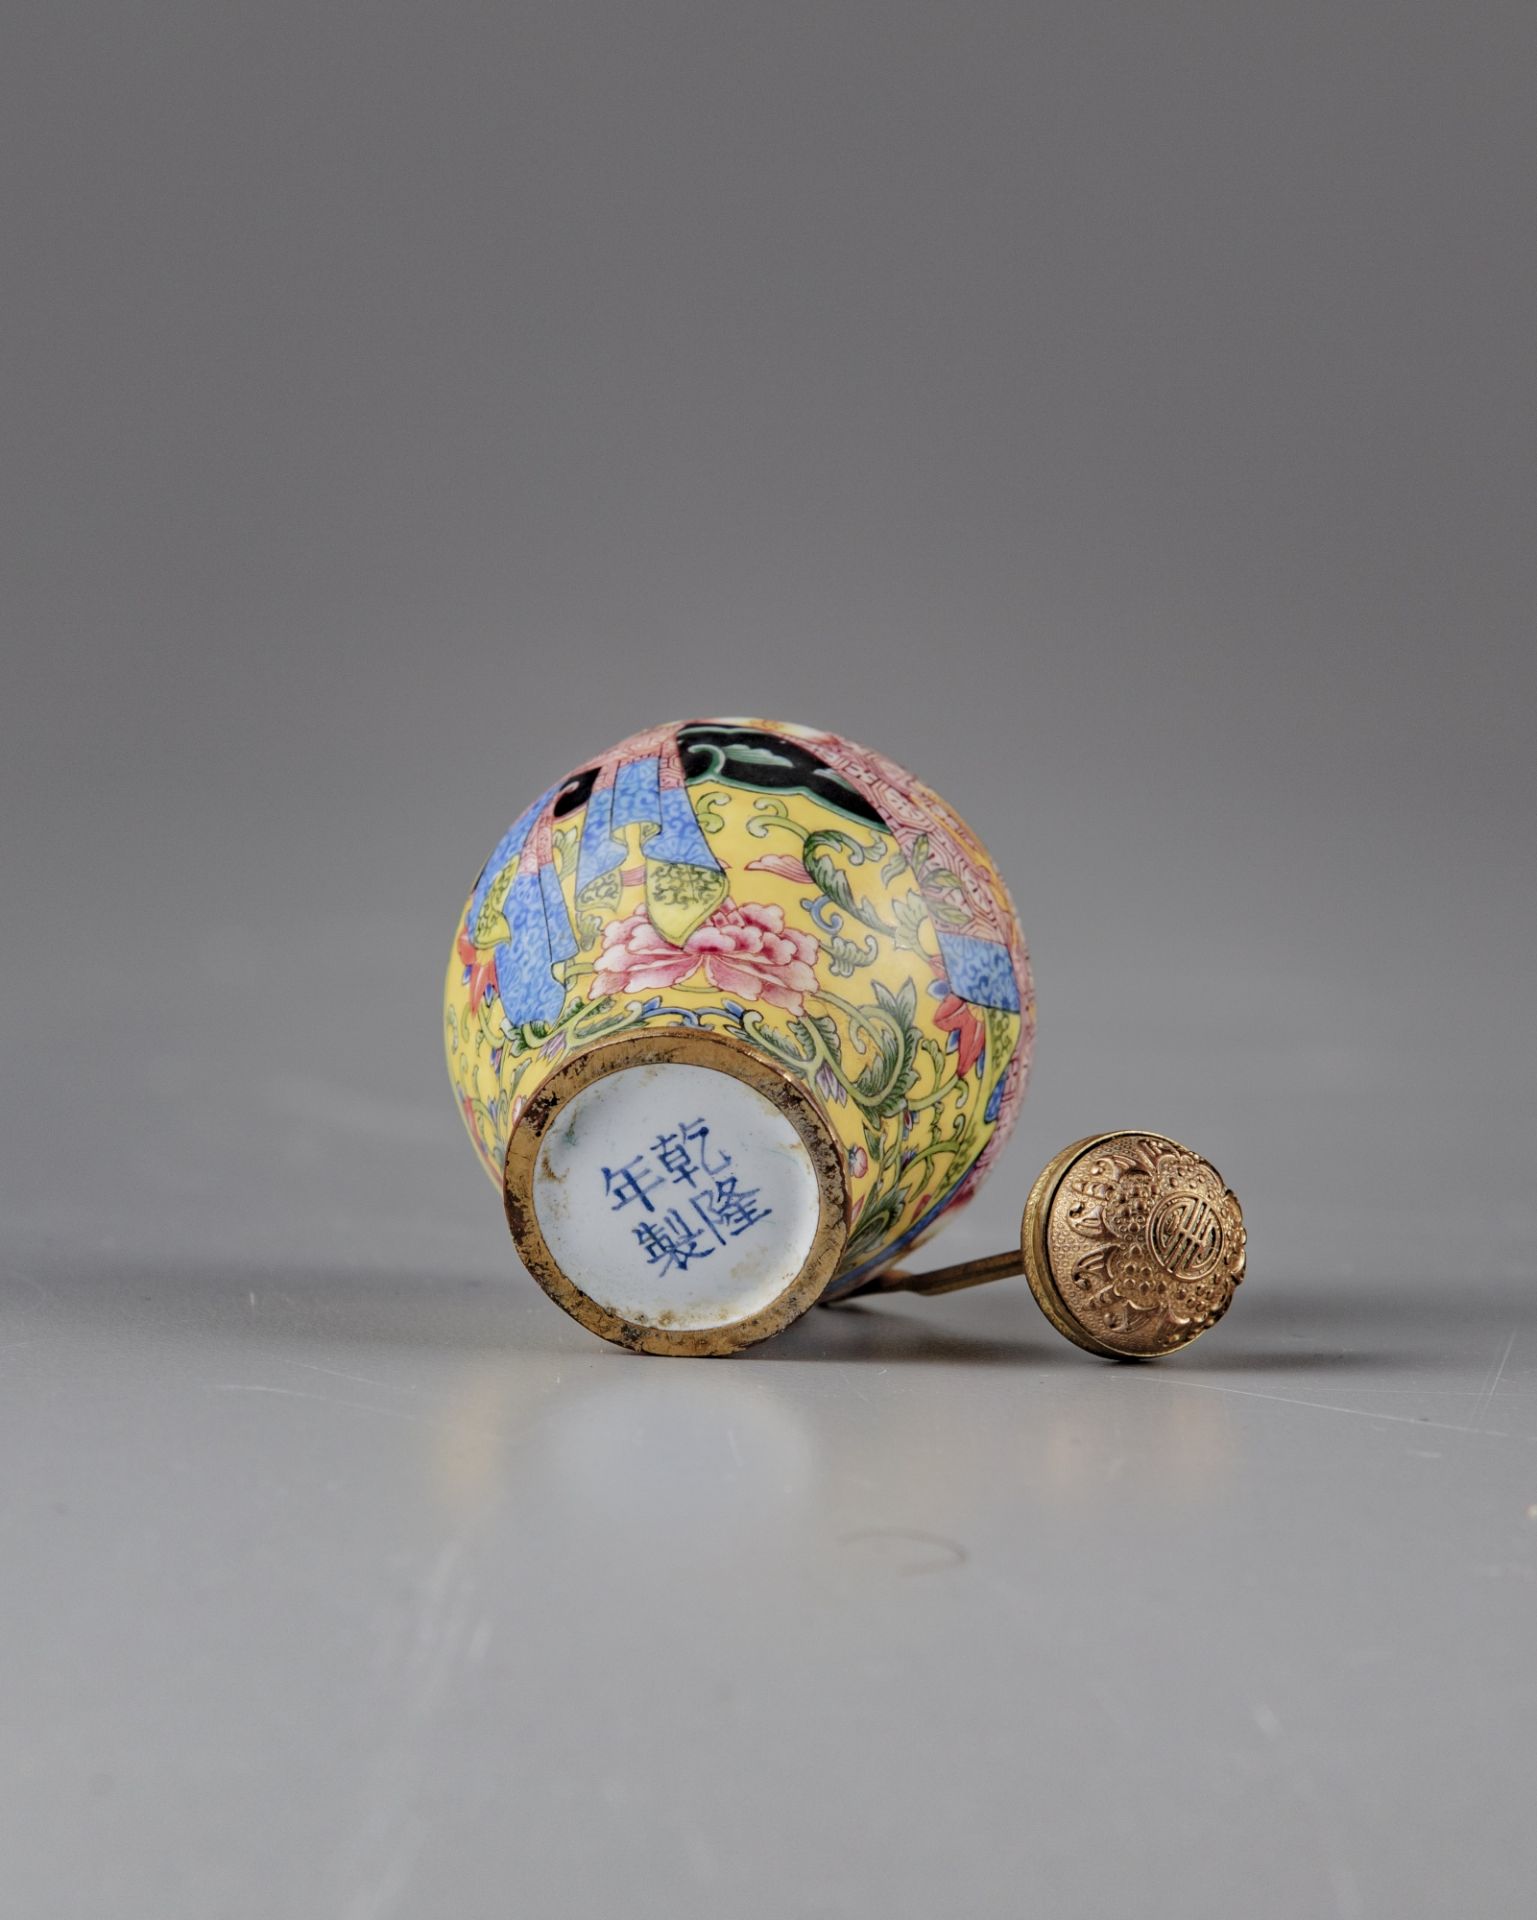 A small Chinese painted enamel trompe l'oeil snuff bottle - Image 3 of 4